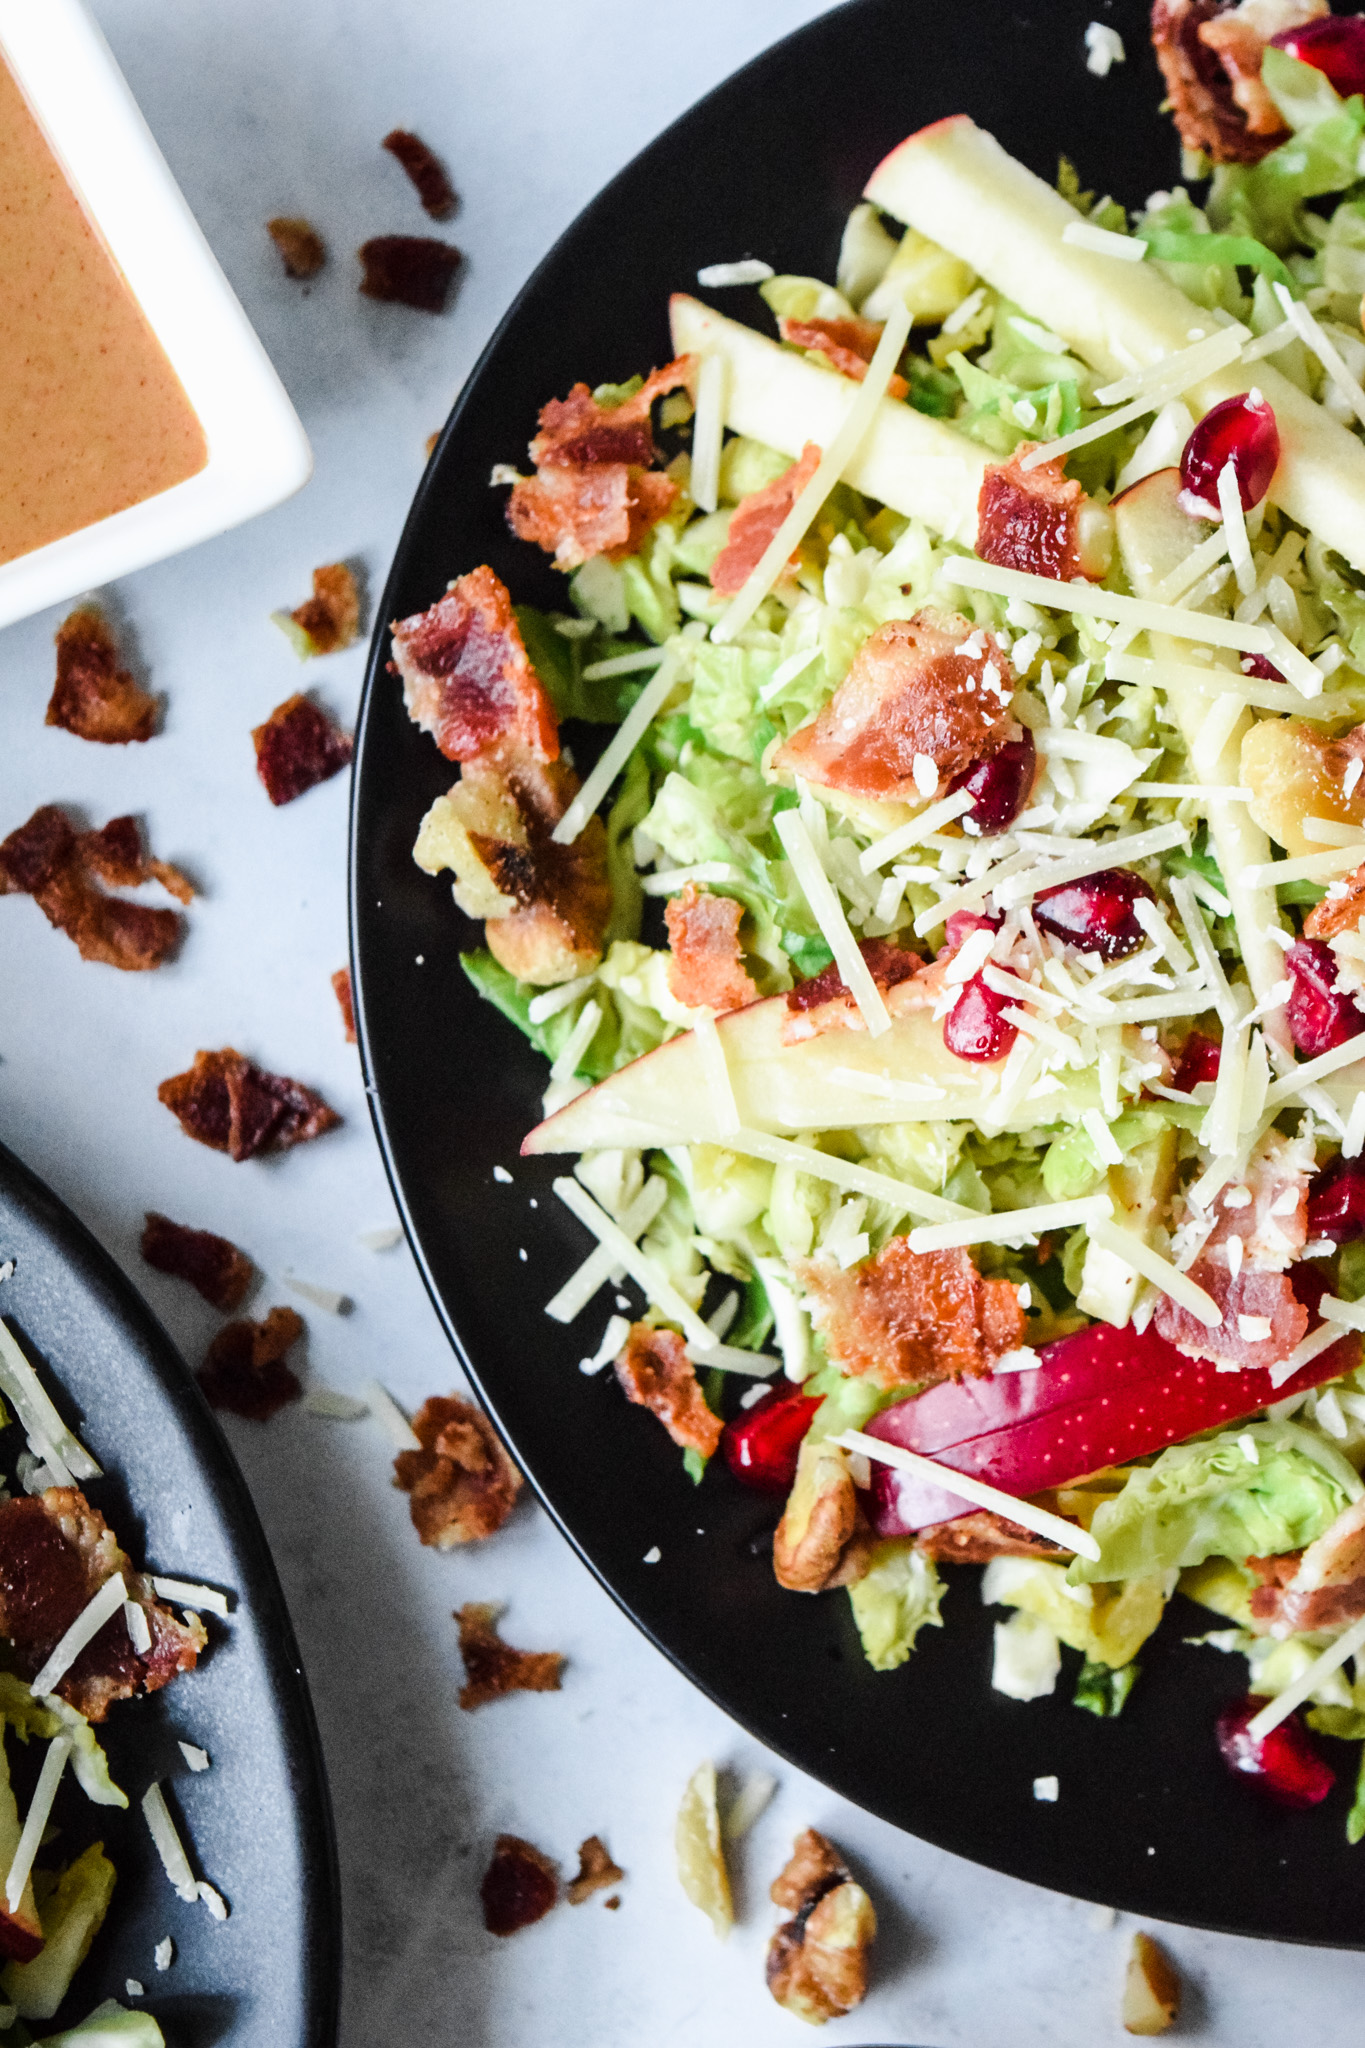 Brussels Sprouts Salad with Apples, Walnuts, Pomegranate Seeds, Bacon, and Grated Parmesan Cheese